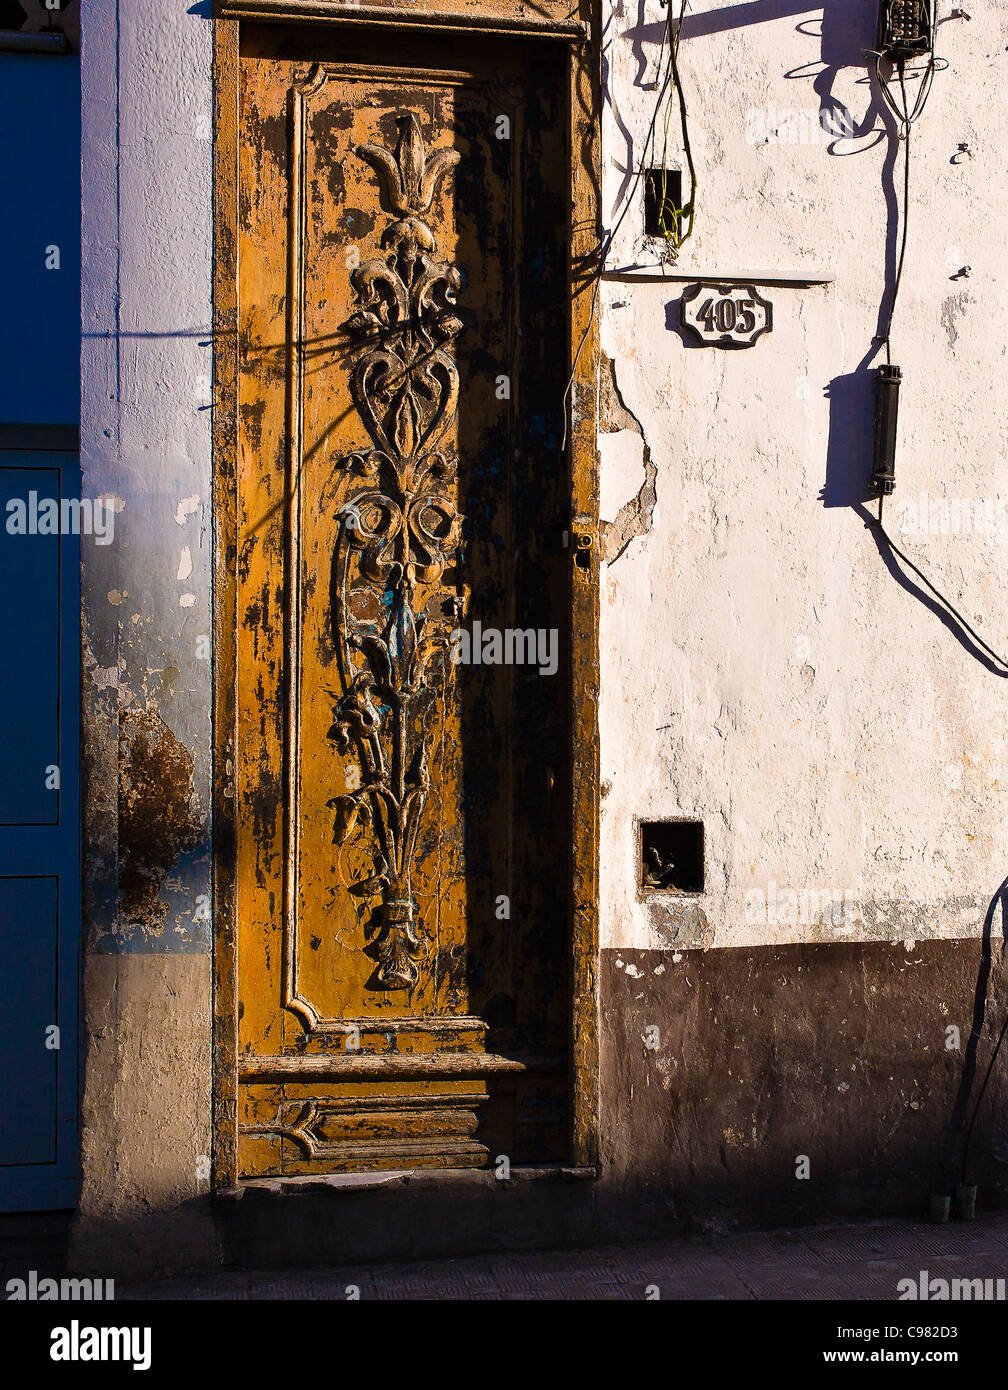 Late afternoon view of ornately carved wooden door on the streets of Havana, Cuba.The door is very weathered with cracks. Stock Photo